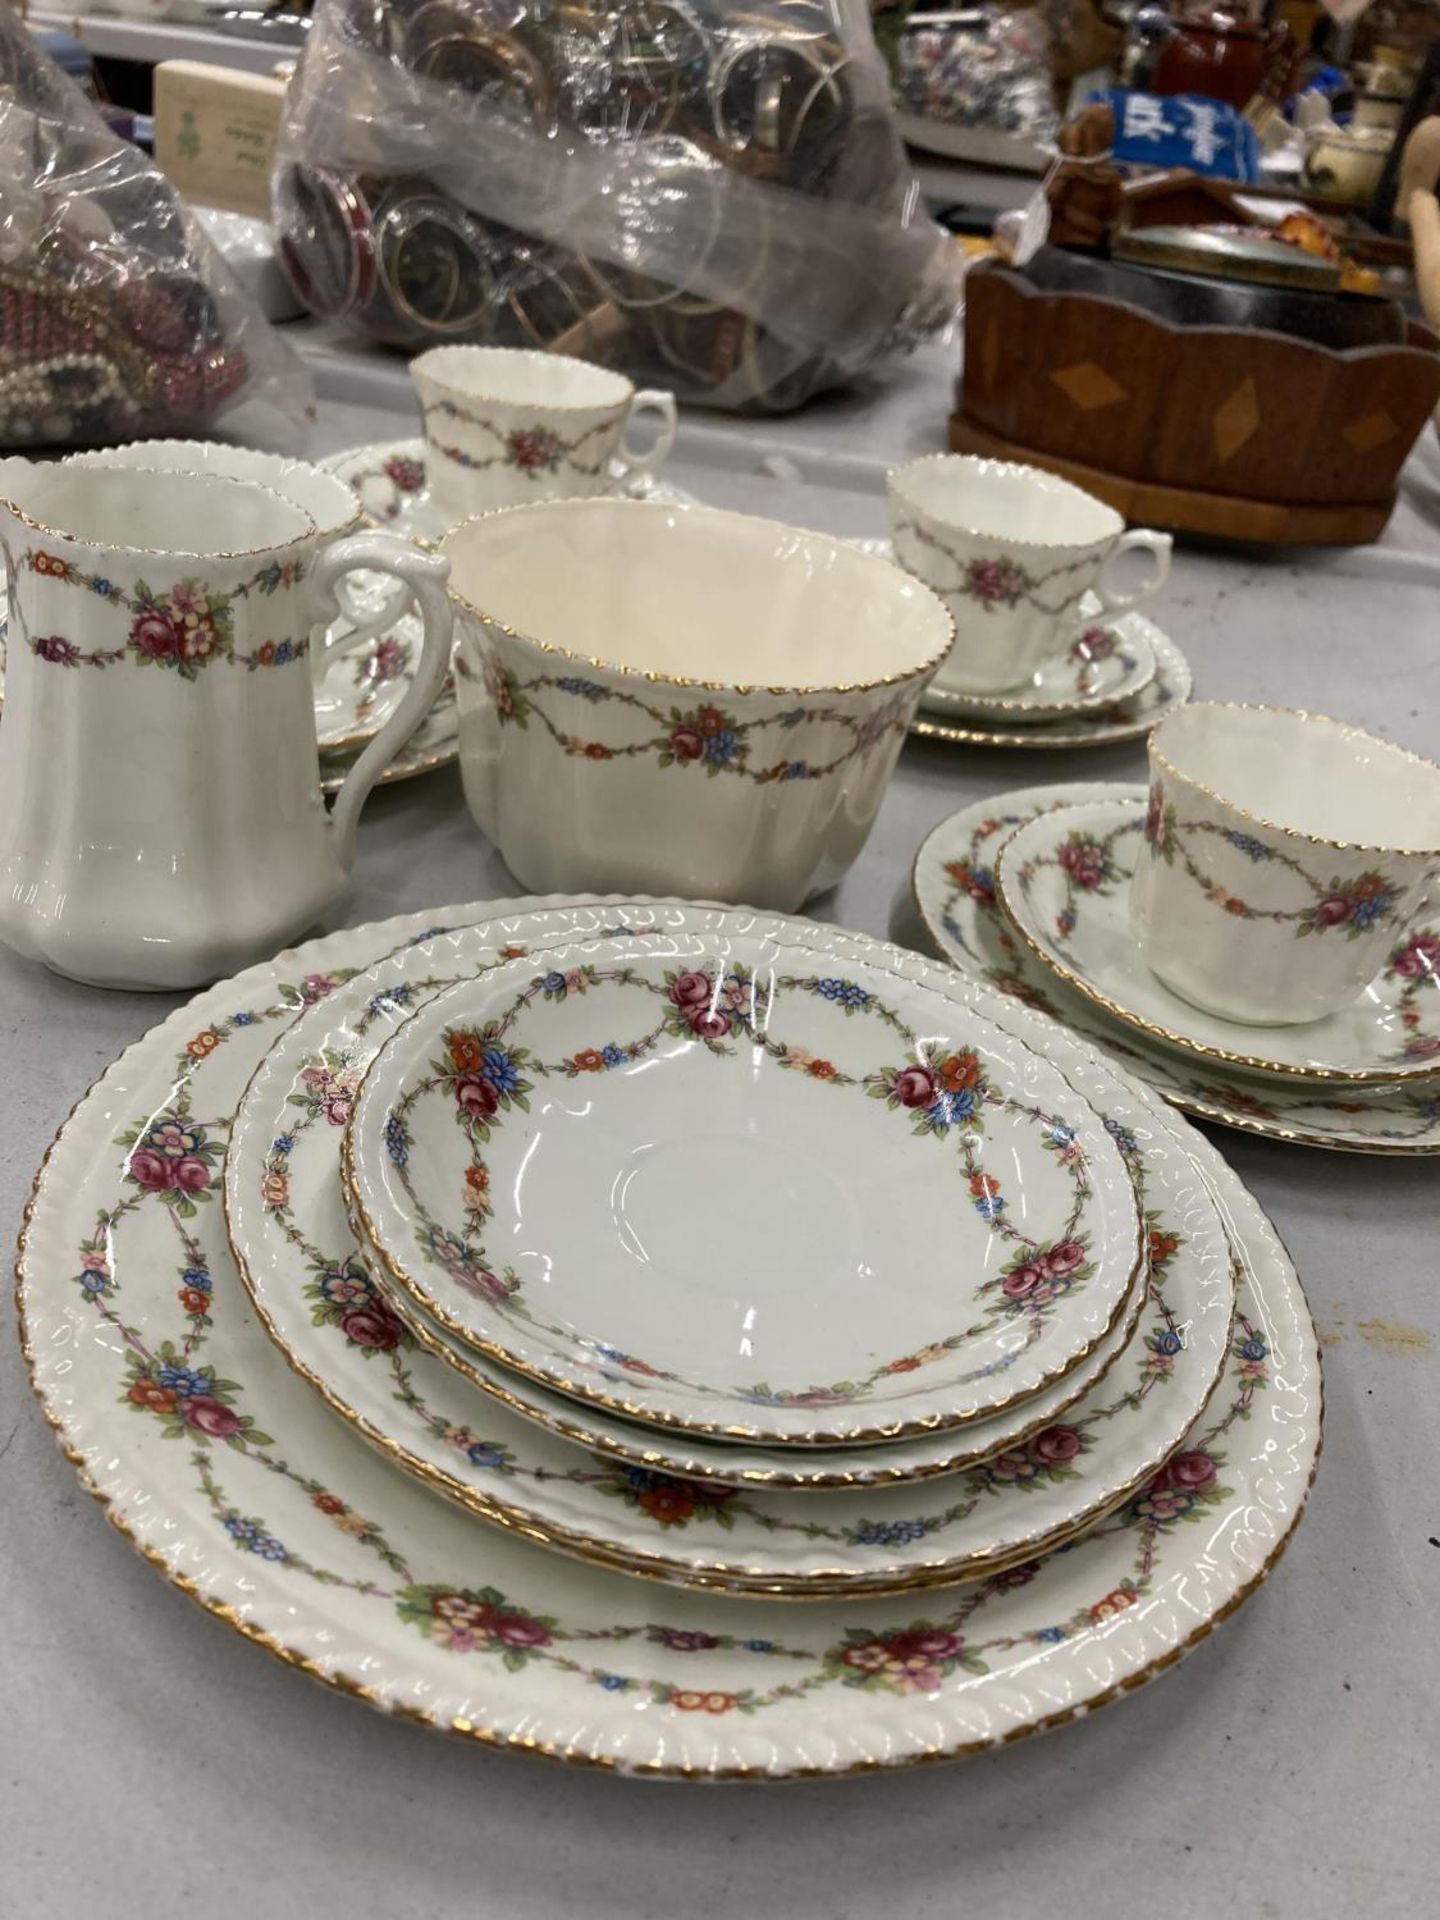 AN ANTIQUE CHINA PART TEASET TO INCLUDE A CAKE PLATE, SUGAR BOWL, CREAM JUG, CUPS, SAUCERS AND - Image 3 of 3